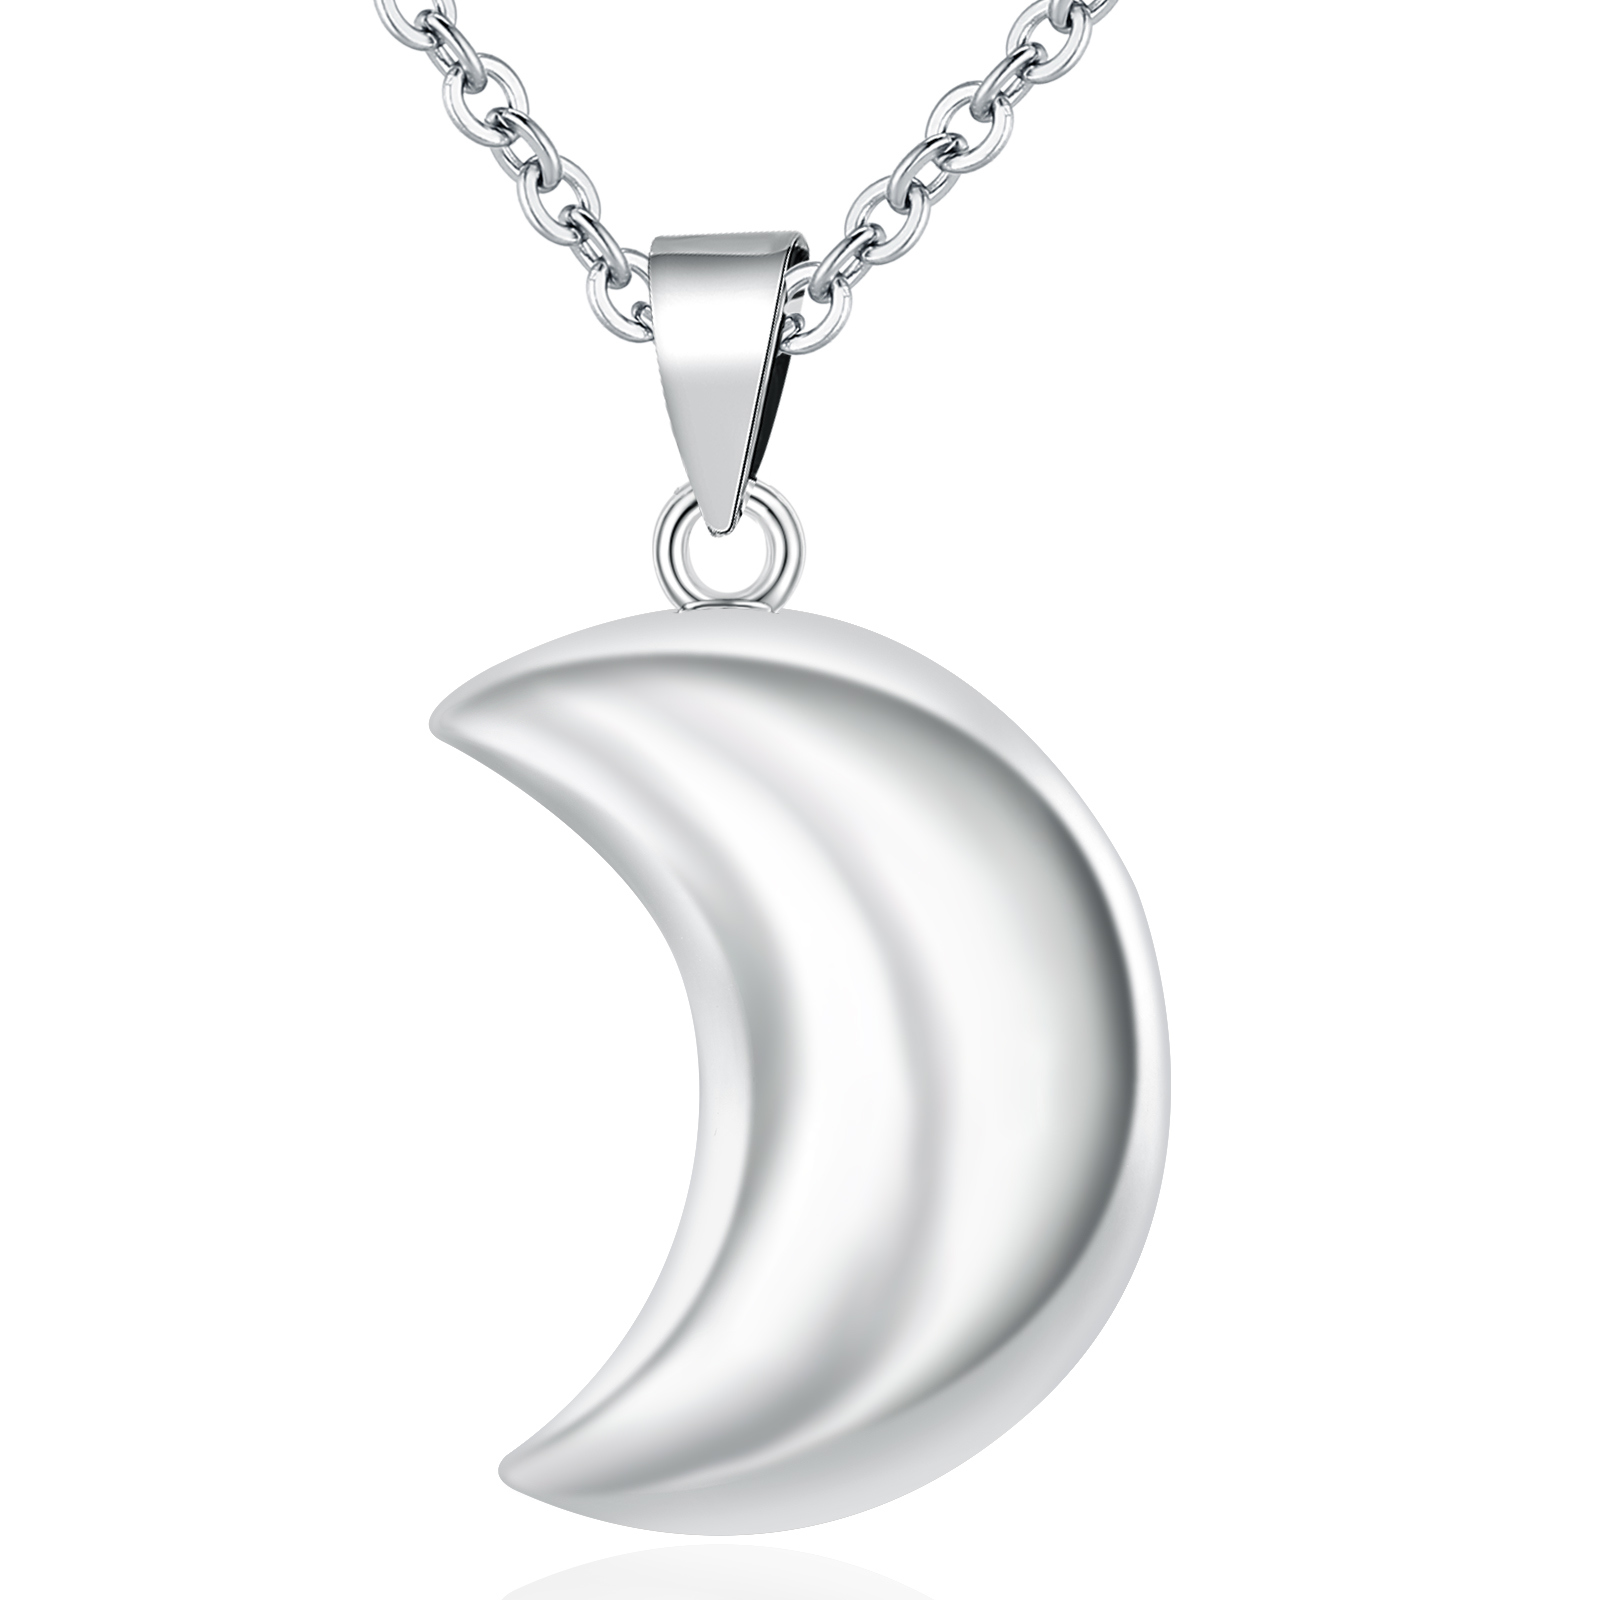 Merryshine Jewelry New Arrival Moon Shape Mexican Bola Harmony Chime Ball Wholesale Supplier